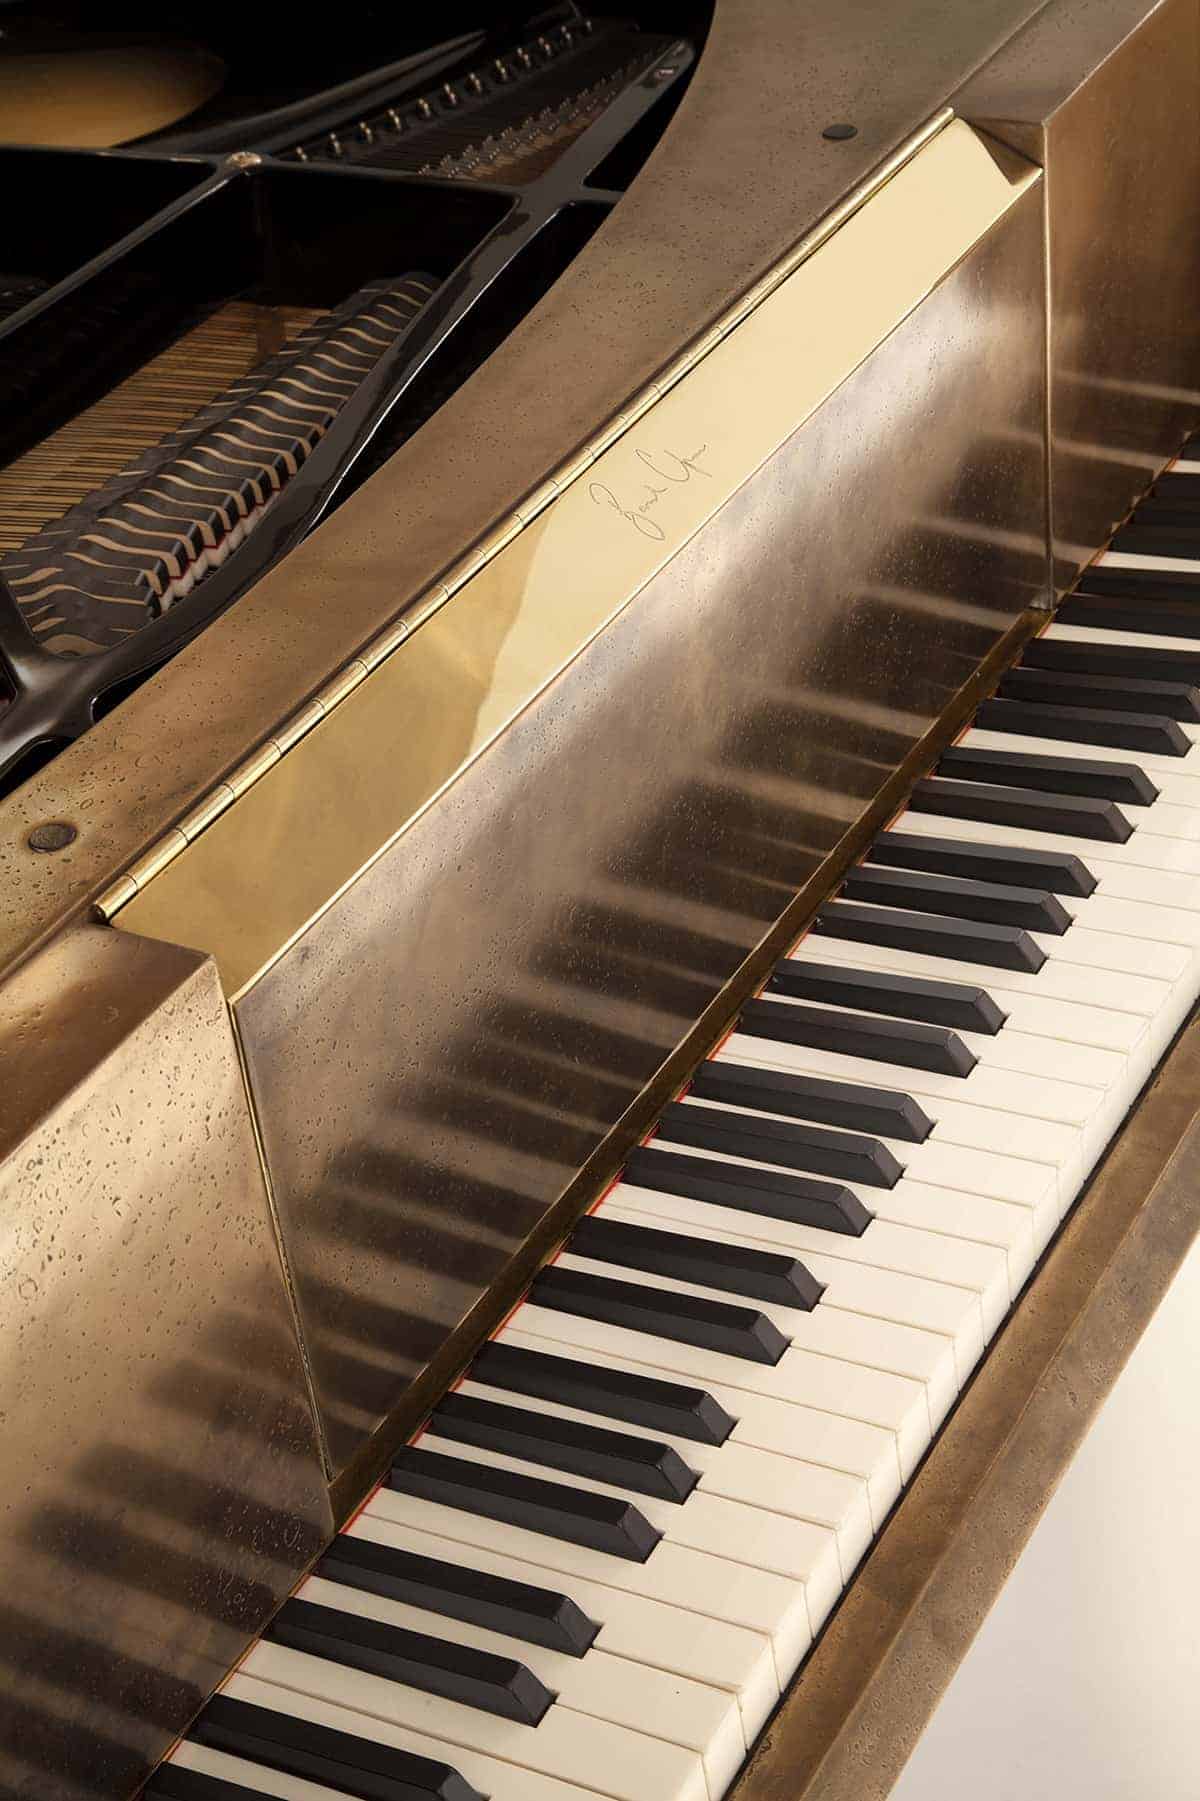 The Baby by Based Upon – Half Million Pound Piano